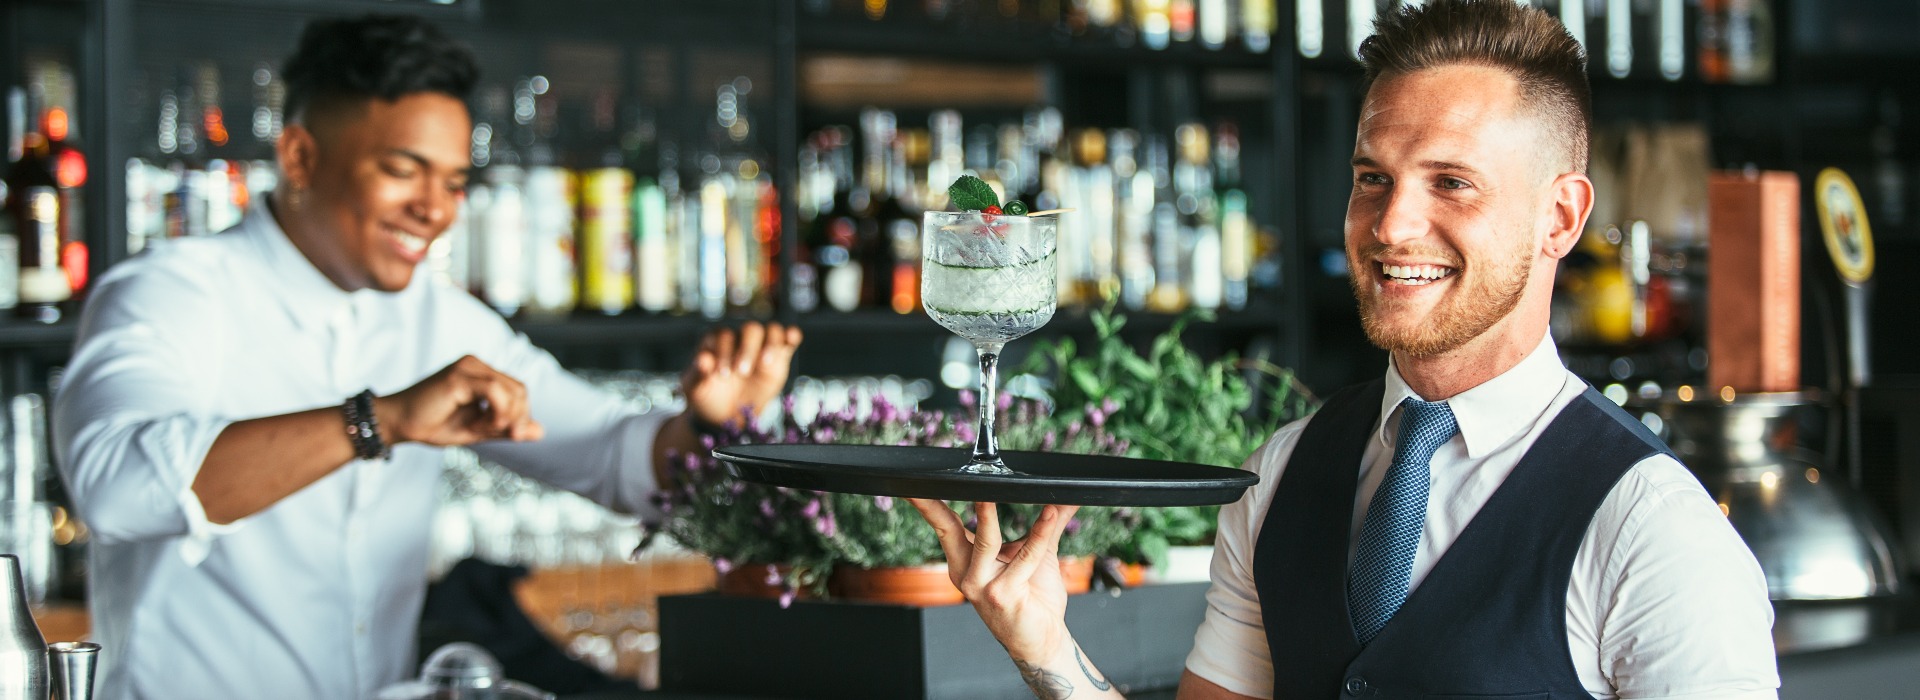 Smiling waiter with a cocktail jpg